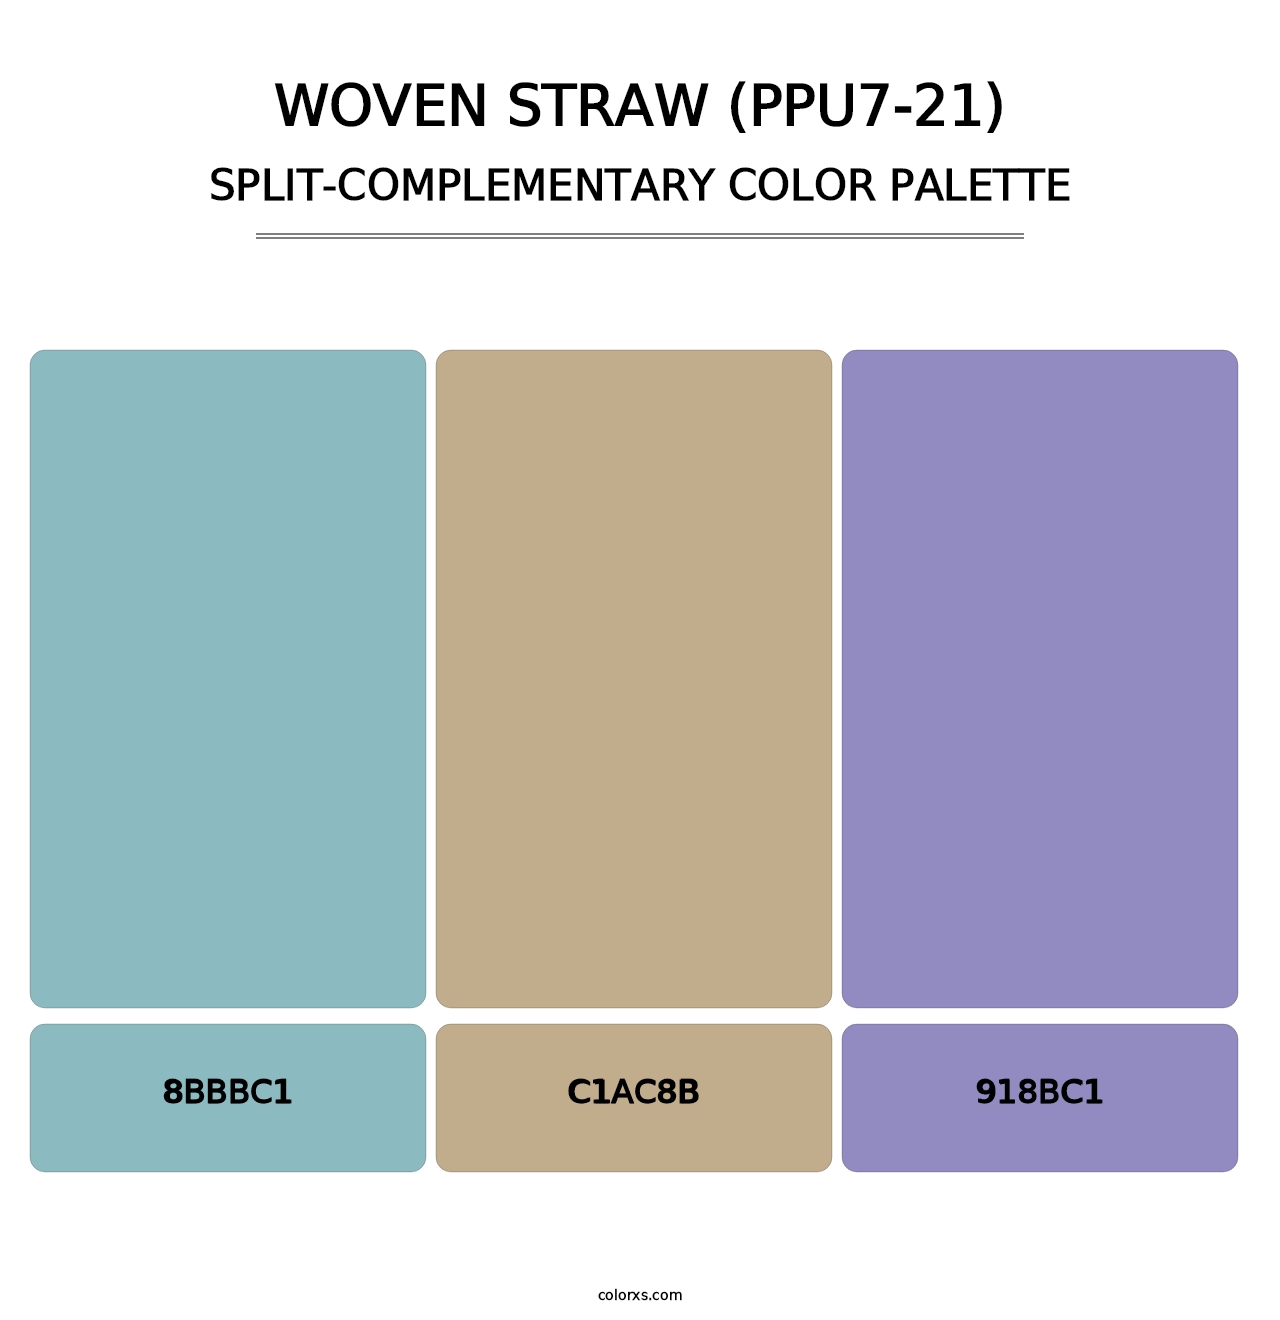 Woven Straw (PPU7-21) - Split-Complementary Color Palette